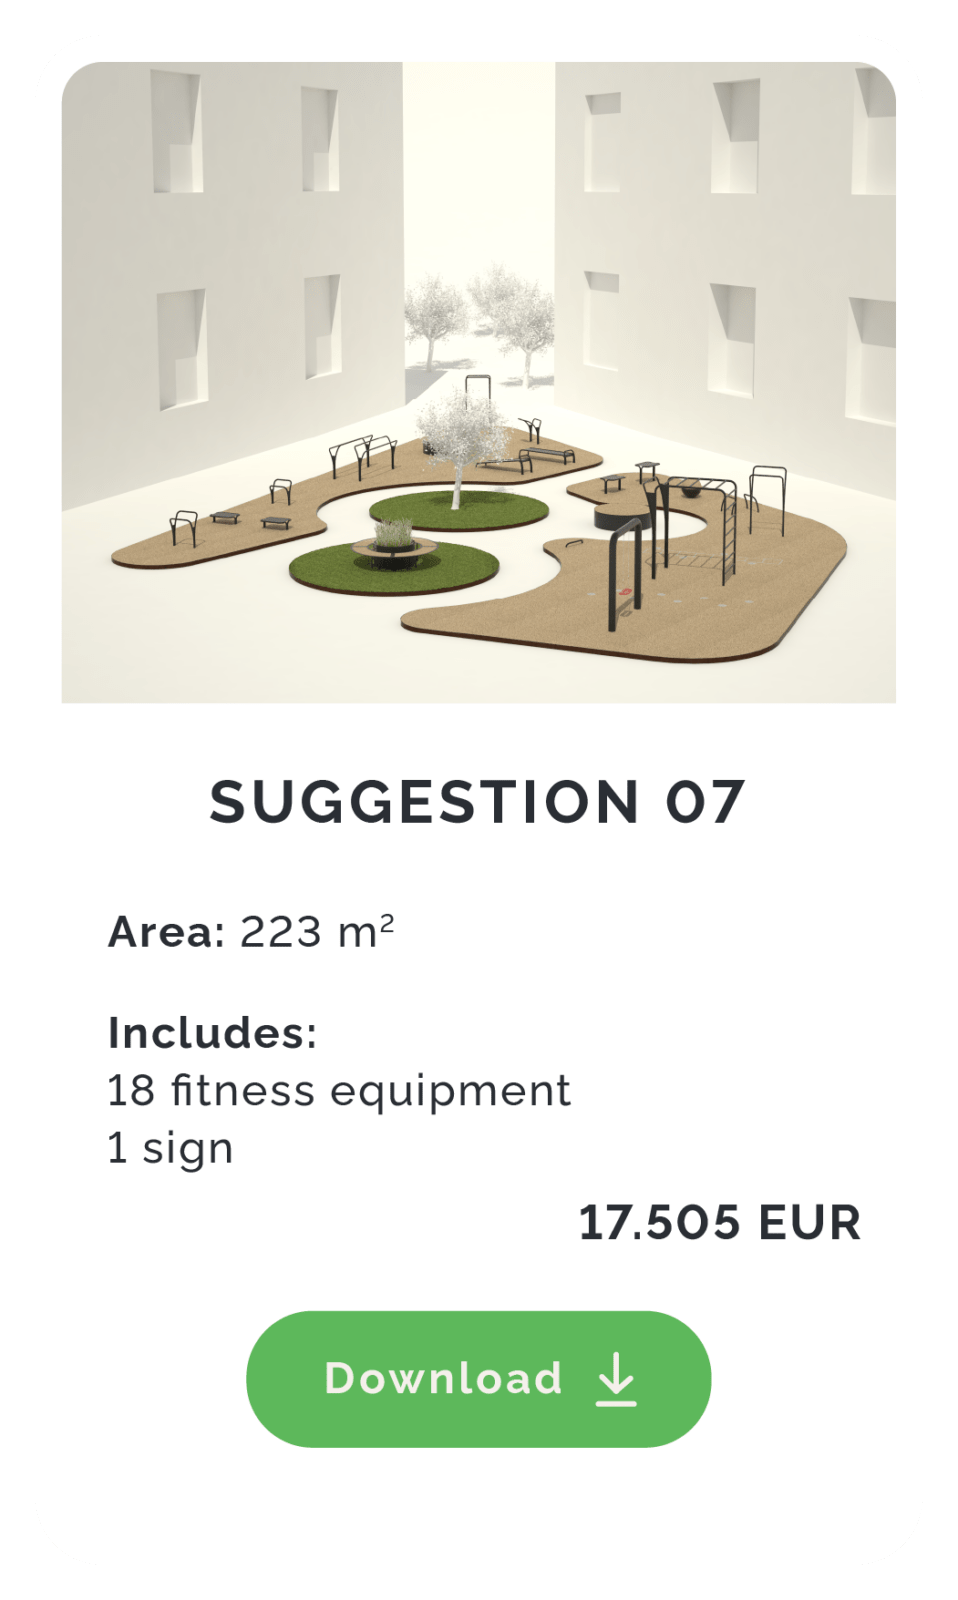 Suggestion for a beautiful and elegant activity area for fitness training